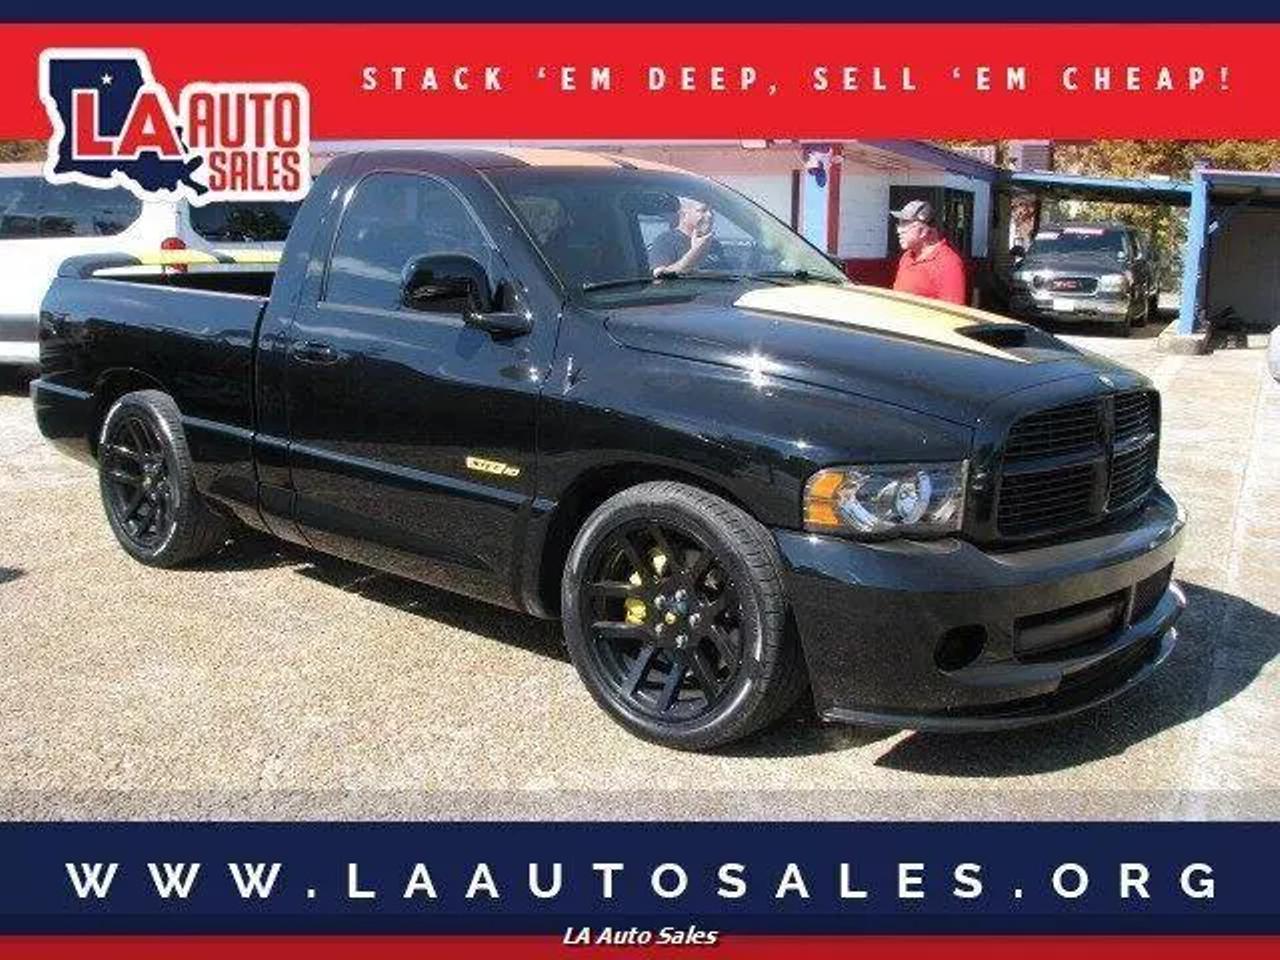 Used Dodge Ram SRT-10 With a 8.3-liter V10 engine for sale: best prices  near you in the USA